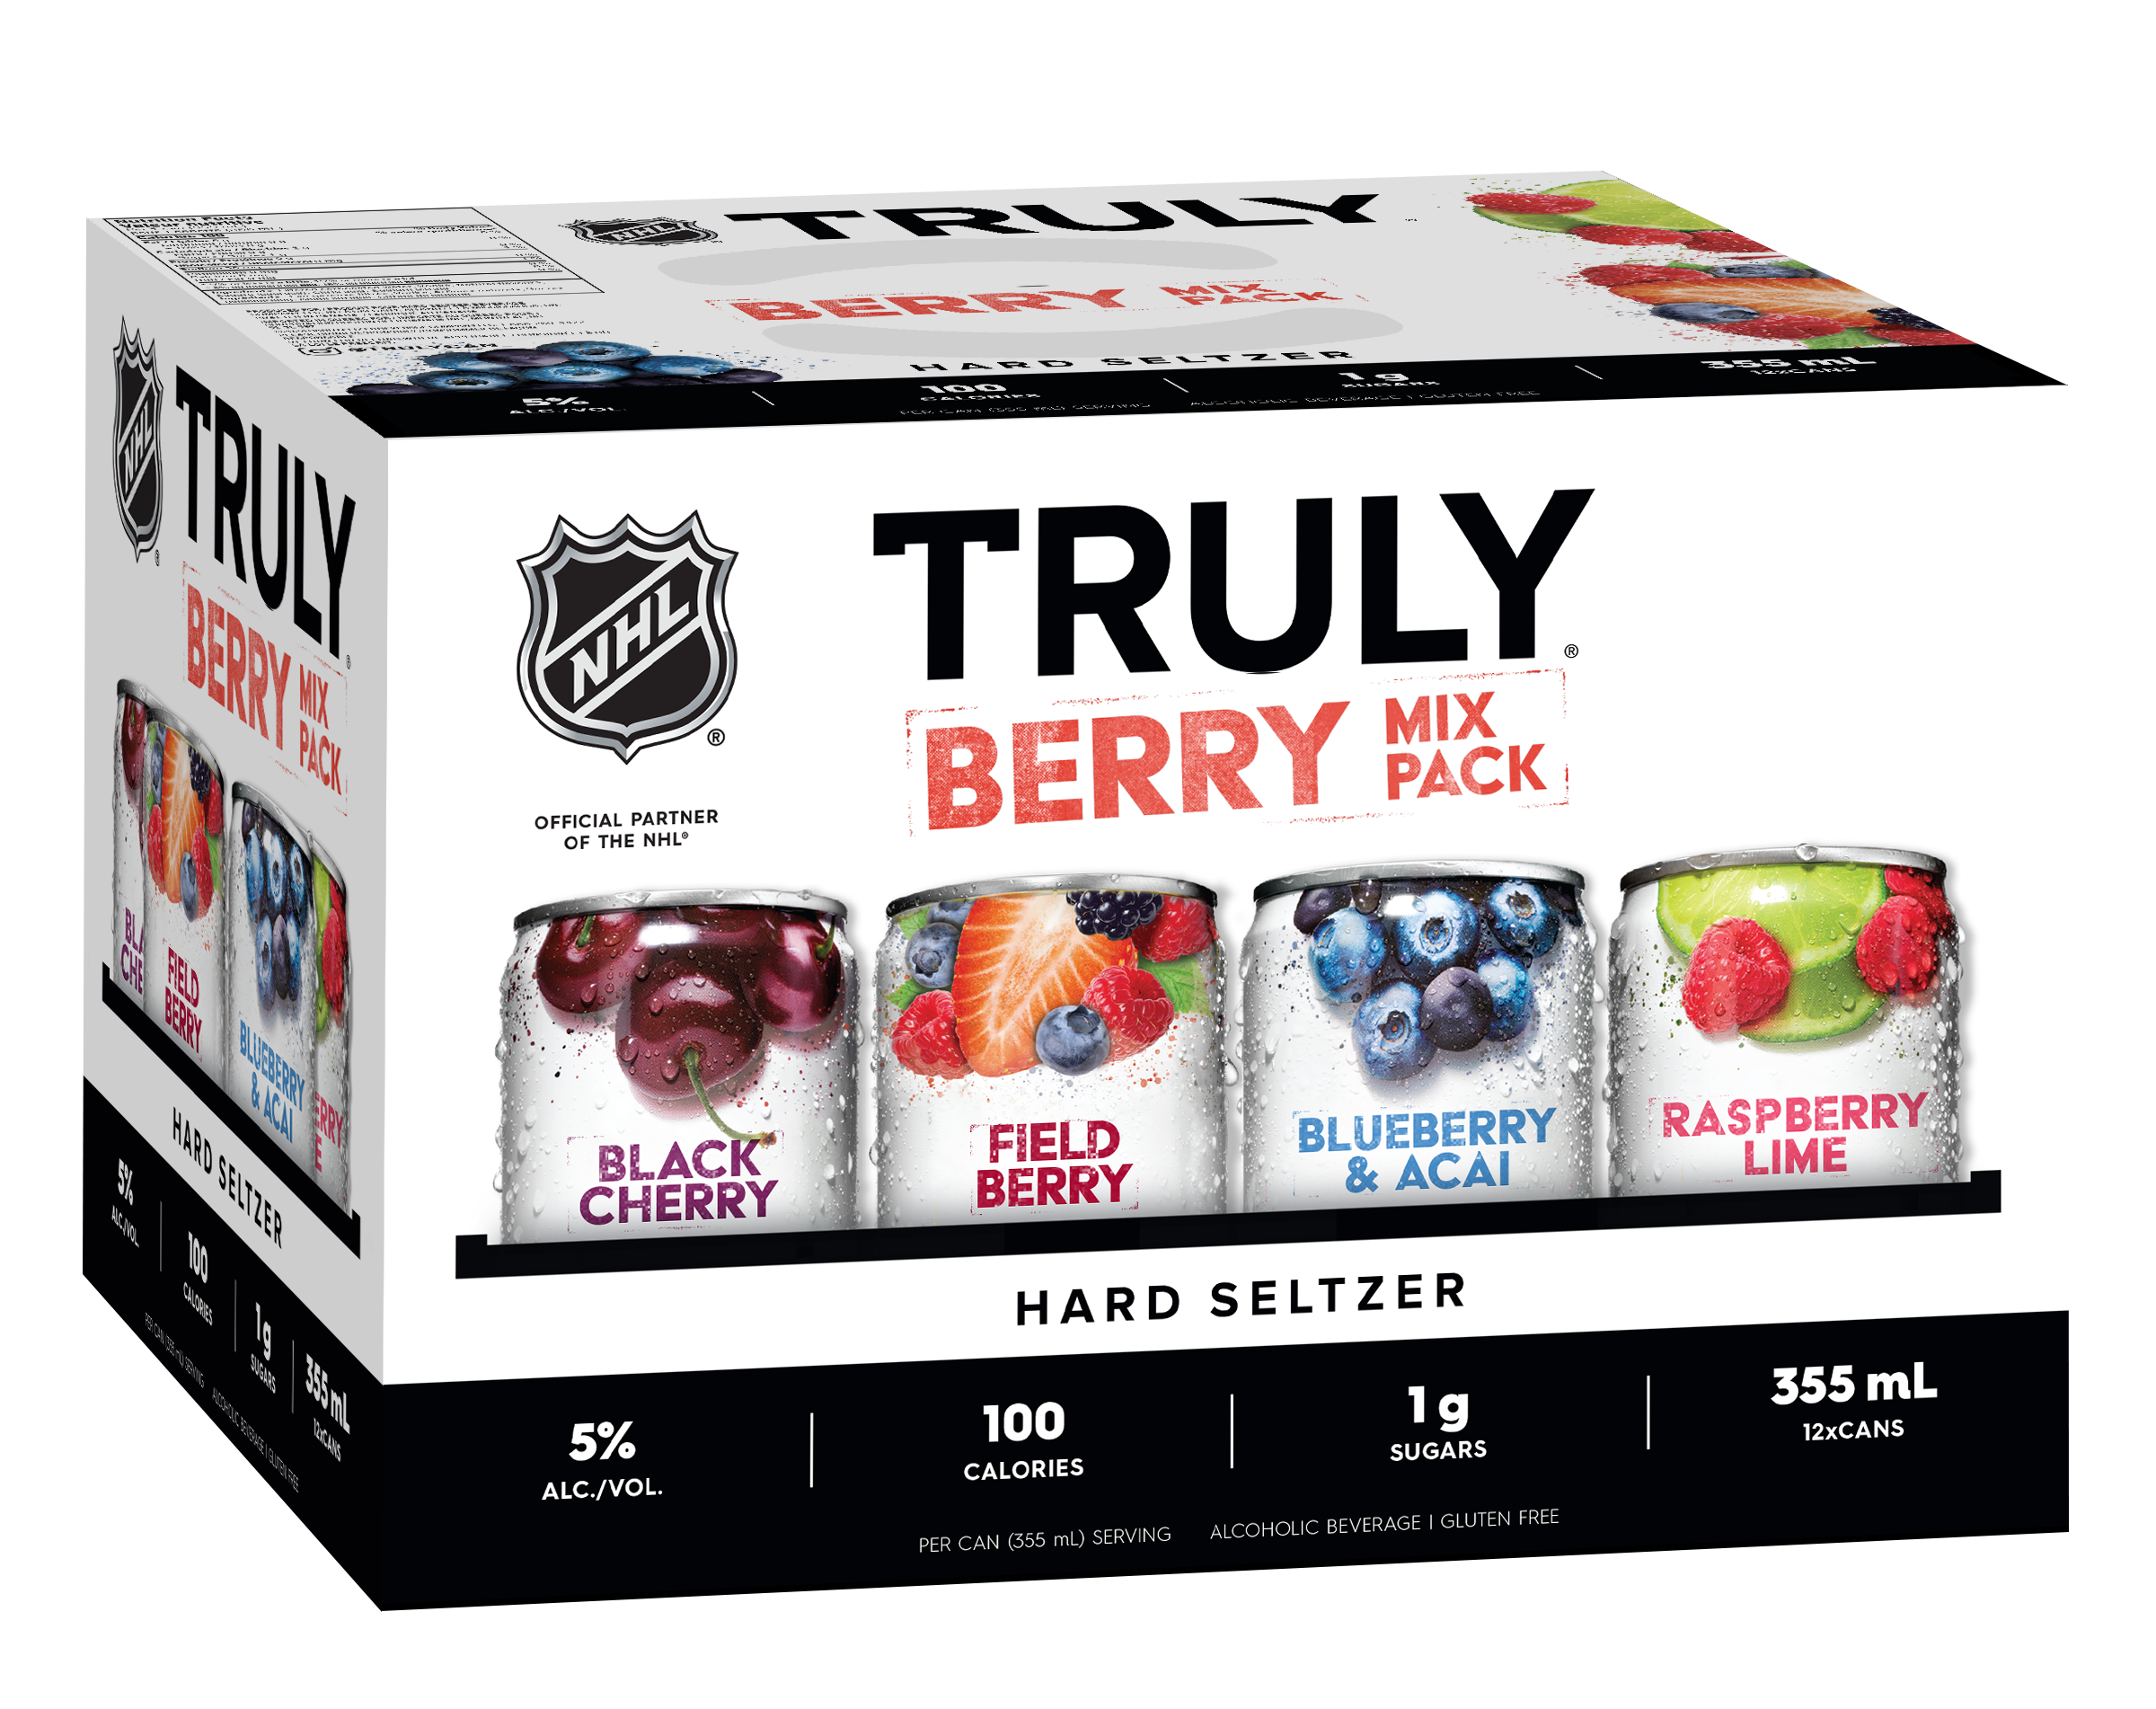 Truly Hard Seltzer Berry Mix Pack with four flavor options, endorsed by NHL, displayed in a box